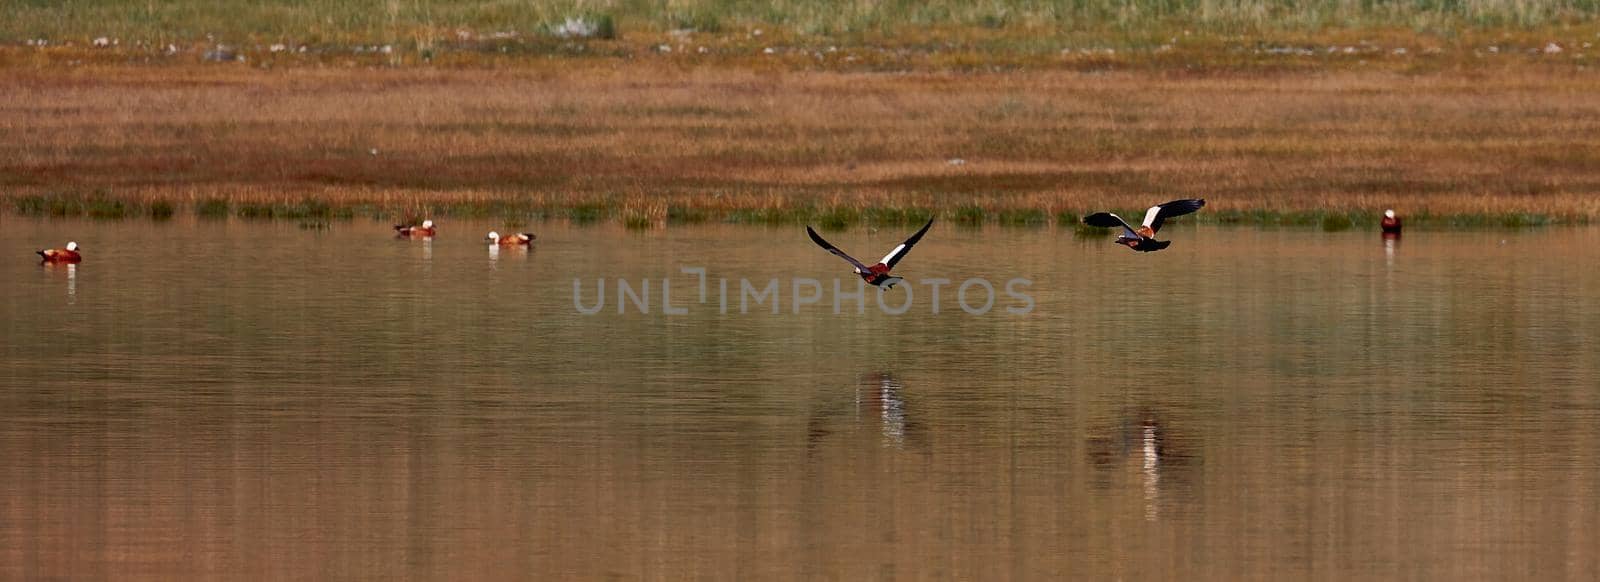 Wild ducks on the lake. Birdwatching on the lake and the foothills of the Altai, Mongolia.